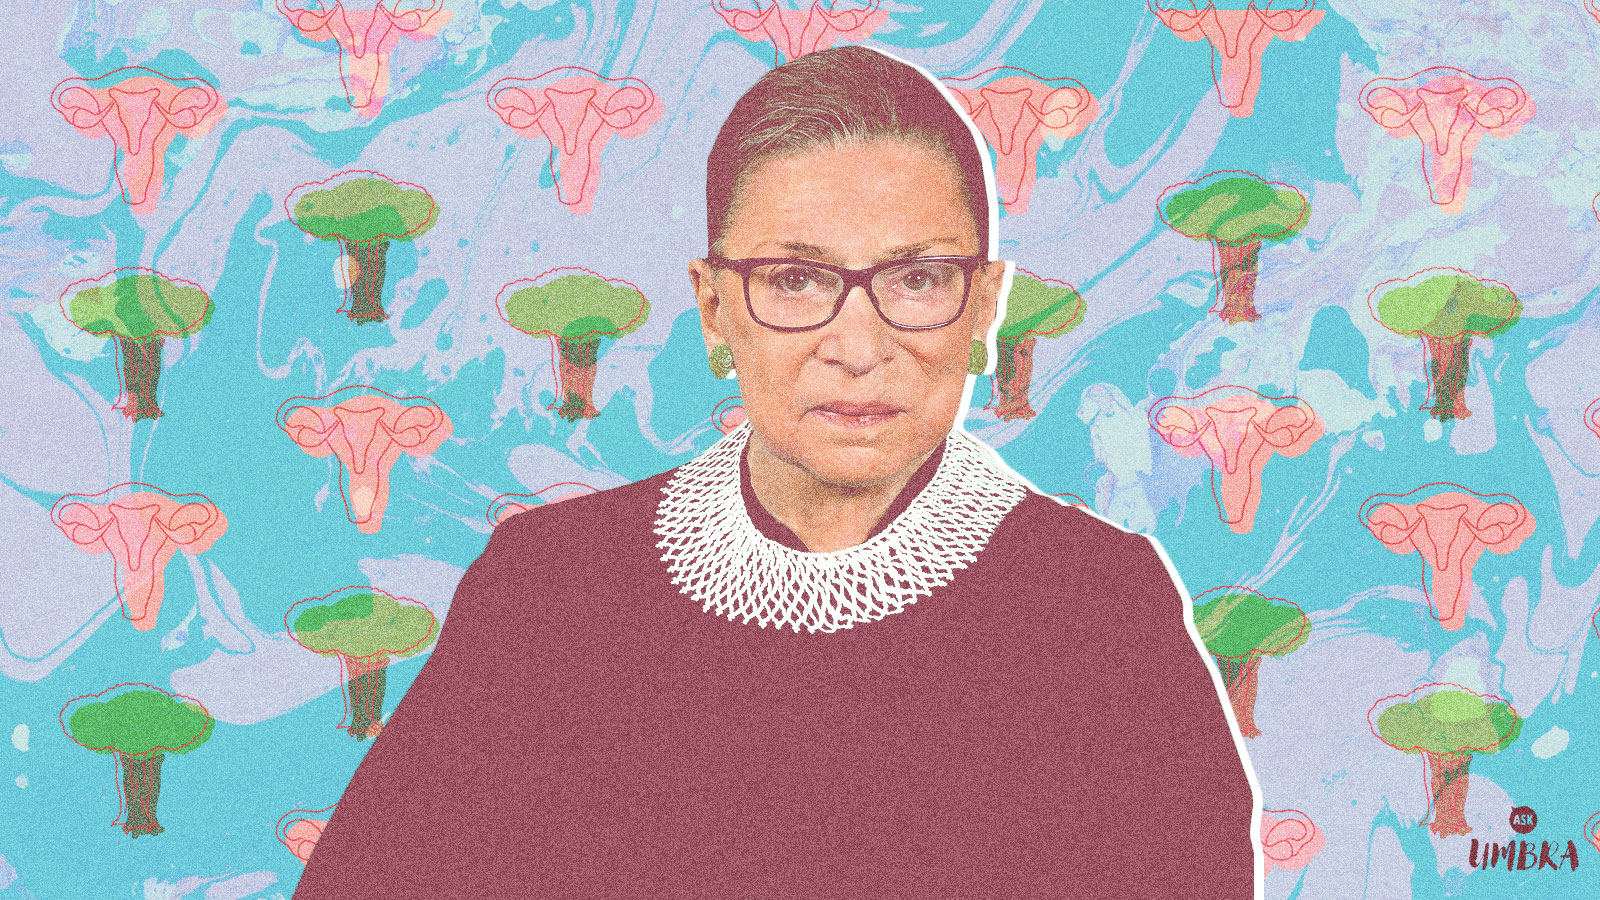 photo of Why are women like Ruth Bader Ginsburg expected to save the Earth? image